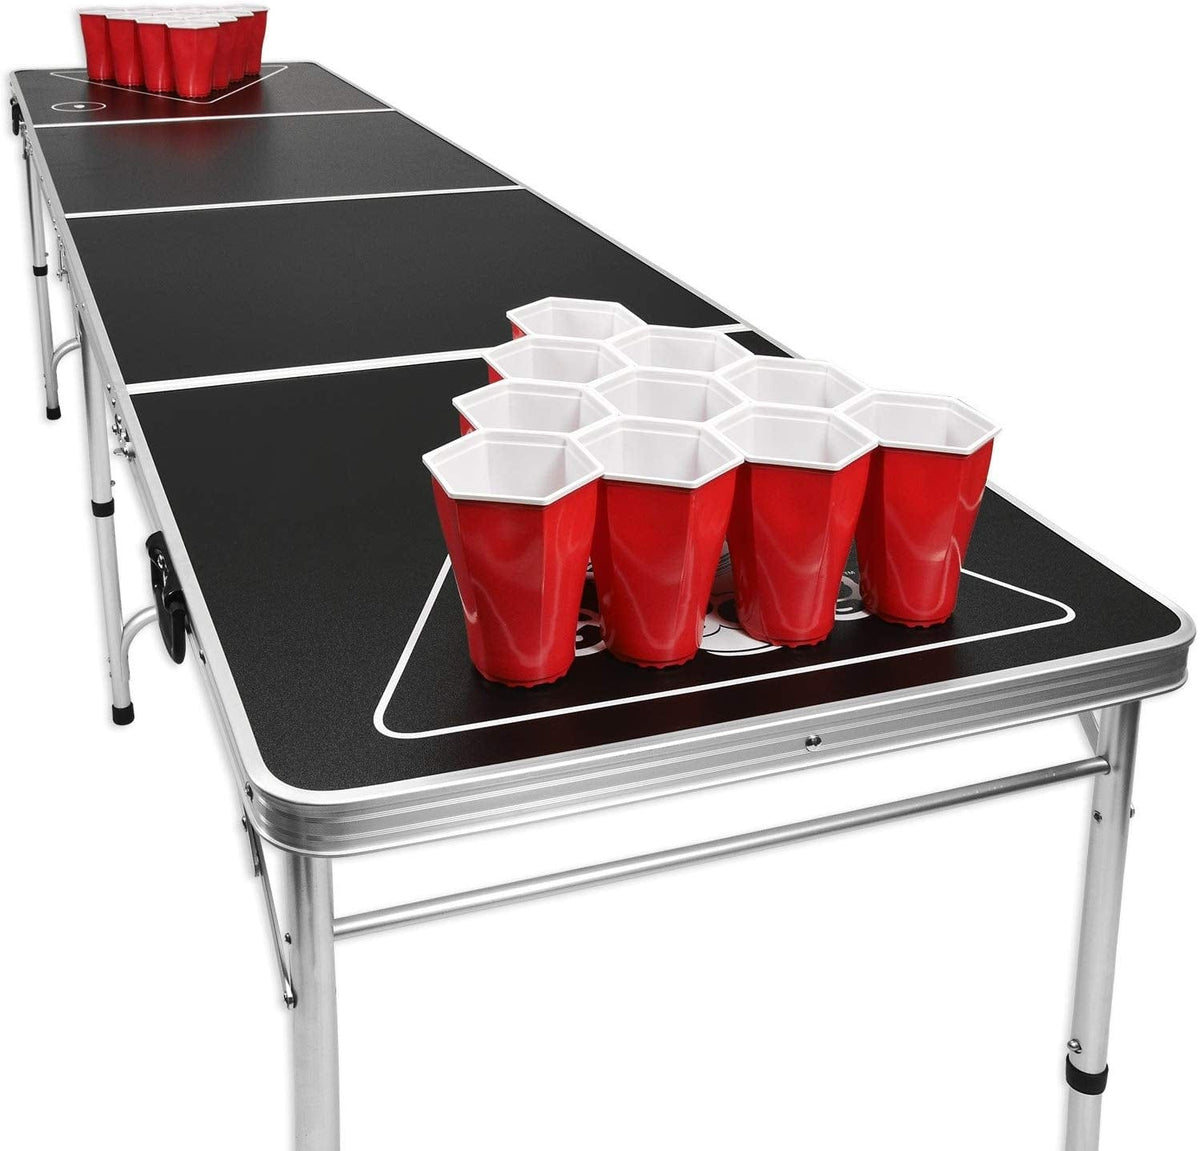 Black Beer Pong Table by BPONG® - 8-FT, Aluminum